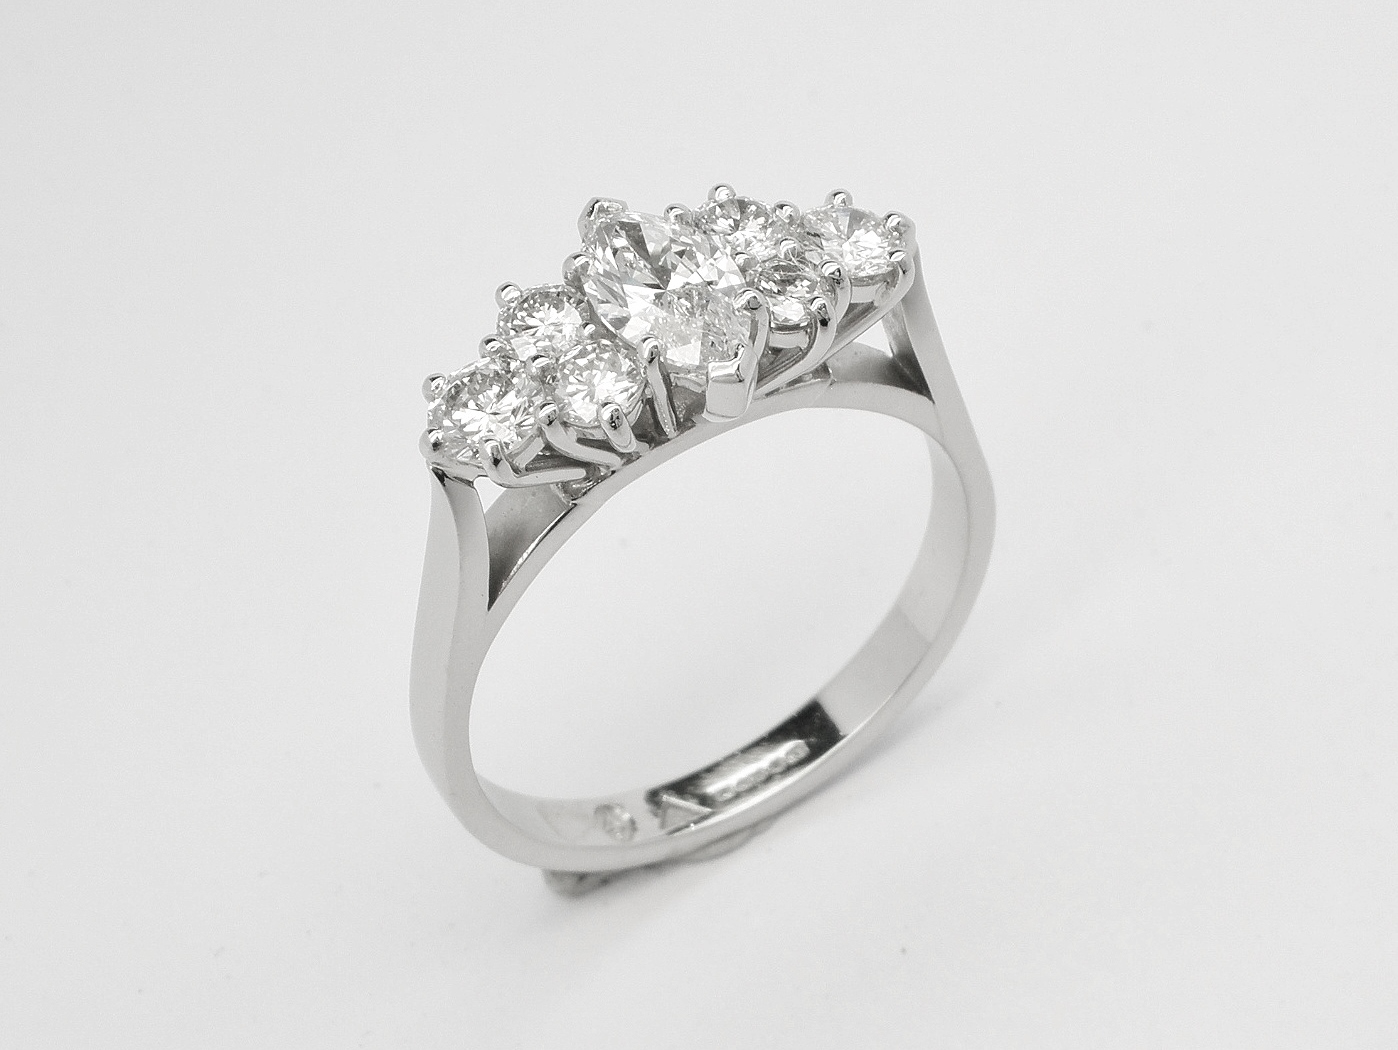 A central marquise diamond flanked on either side with a trefoil of round brilliant cut diamond creating a 7 stone ring mounted in platinum.